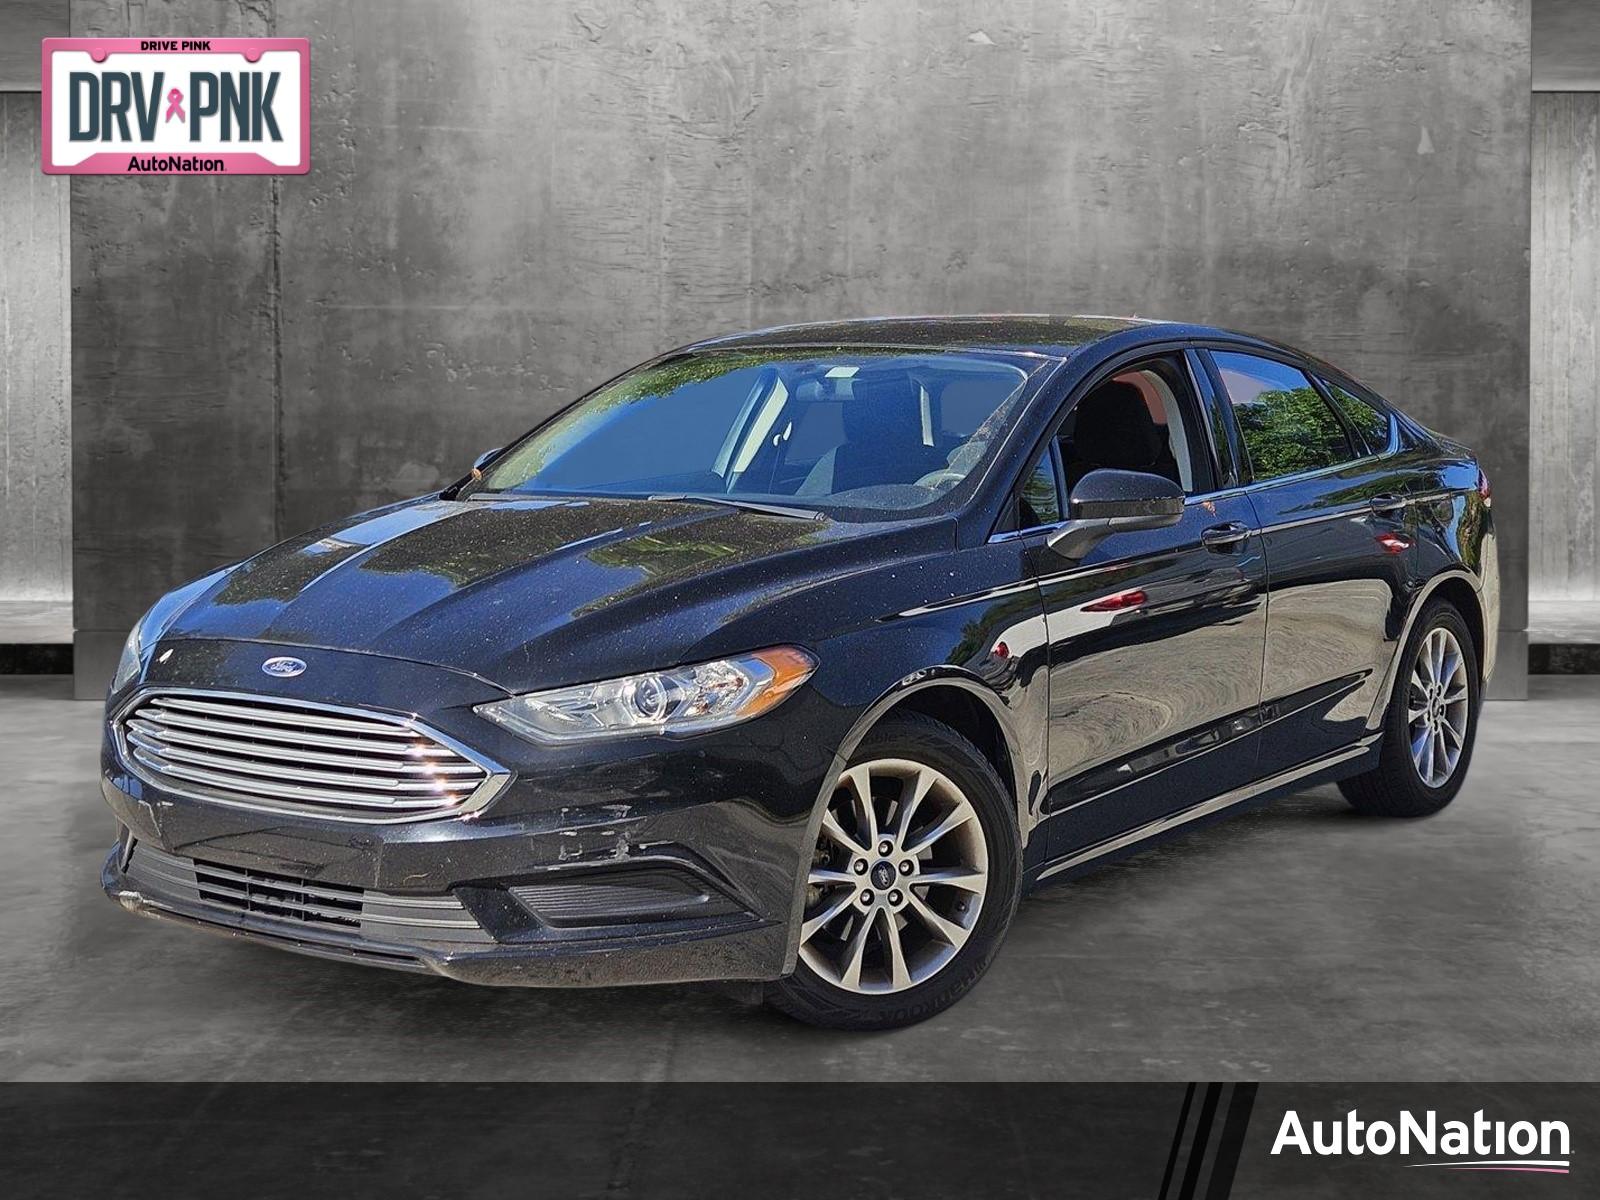 2017 Ford Fusion Vehicle Photo in Margate, FL 33063